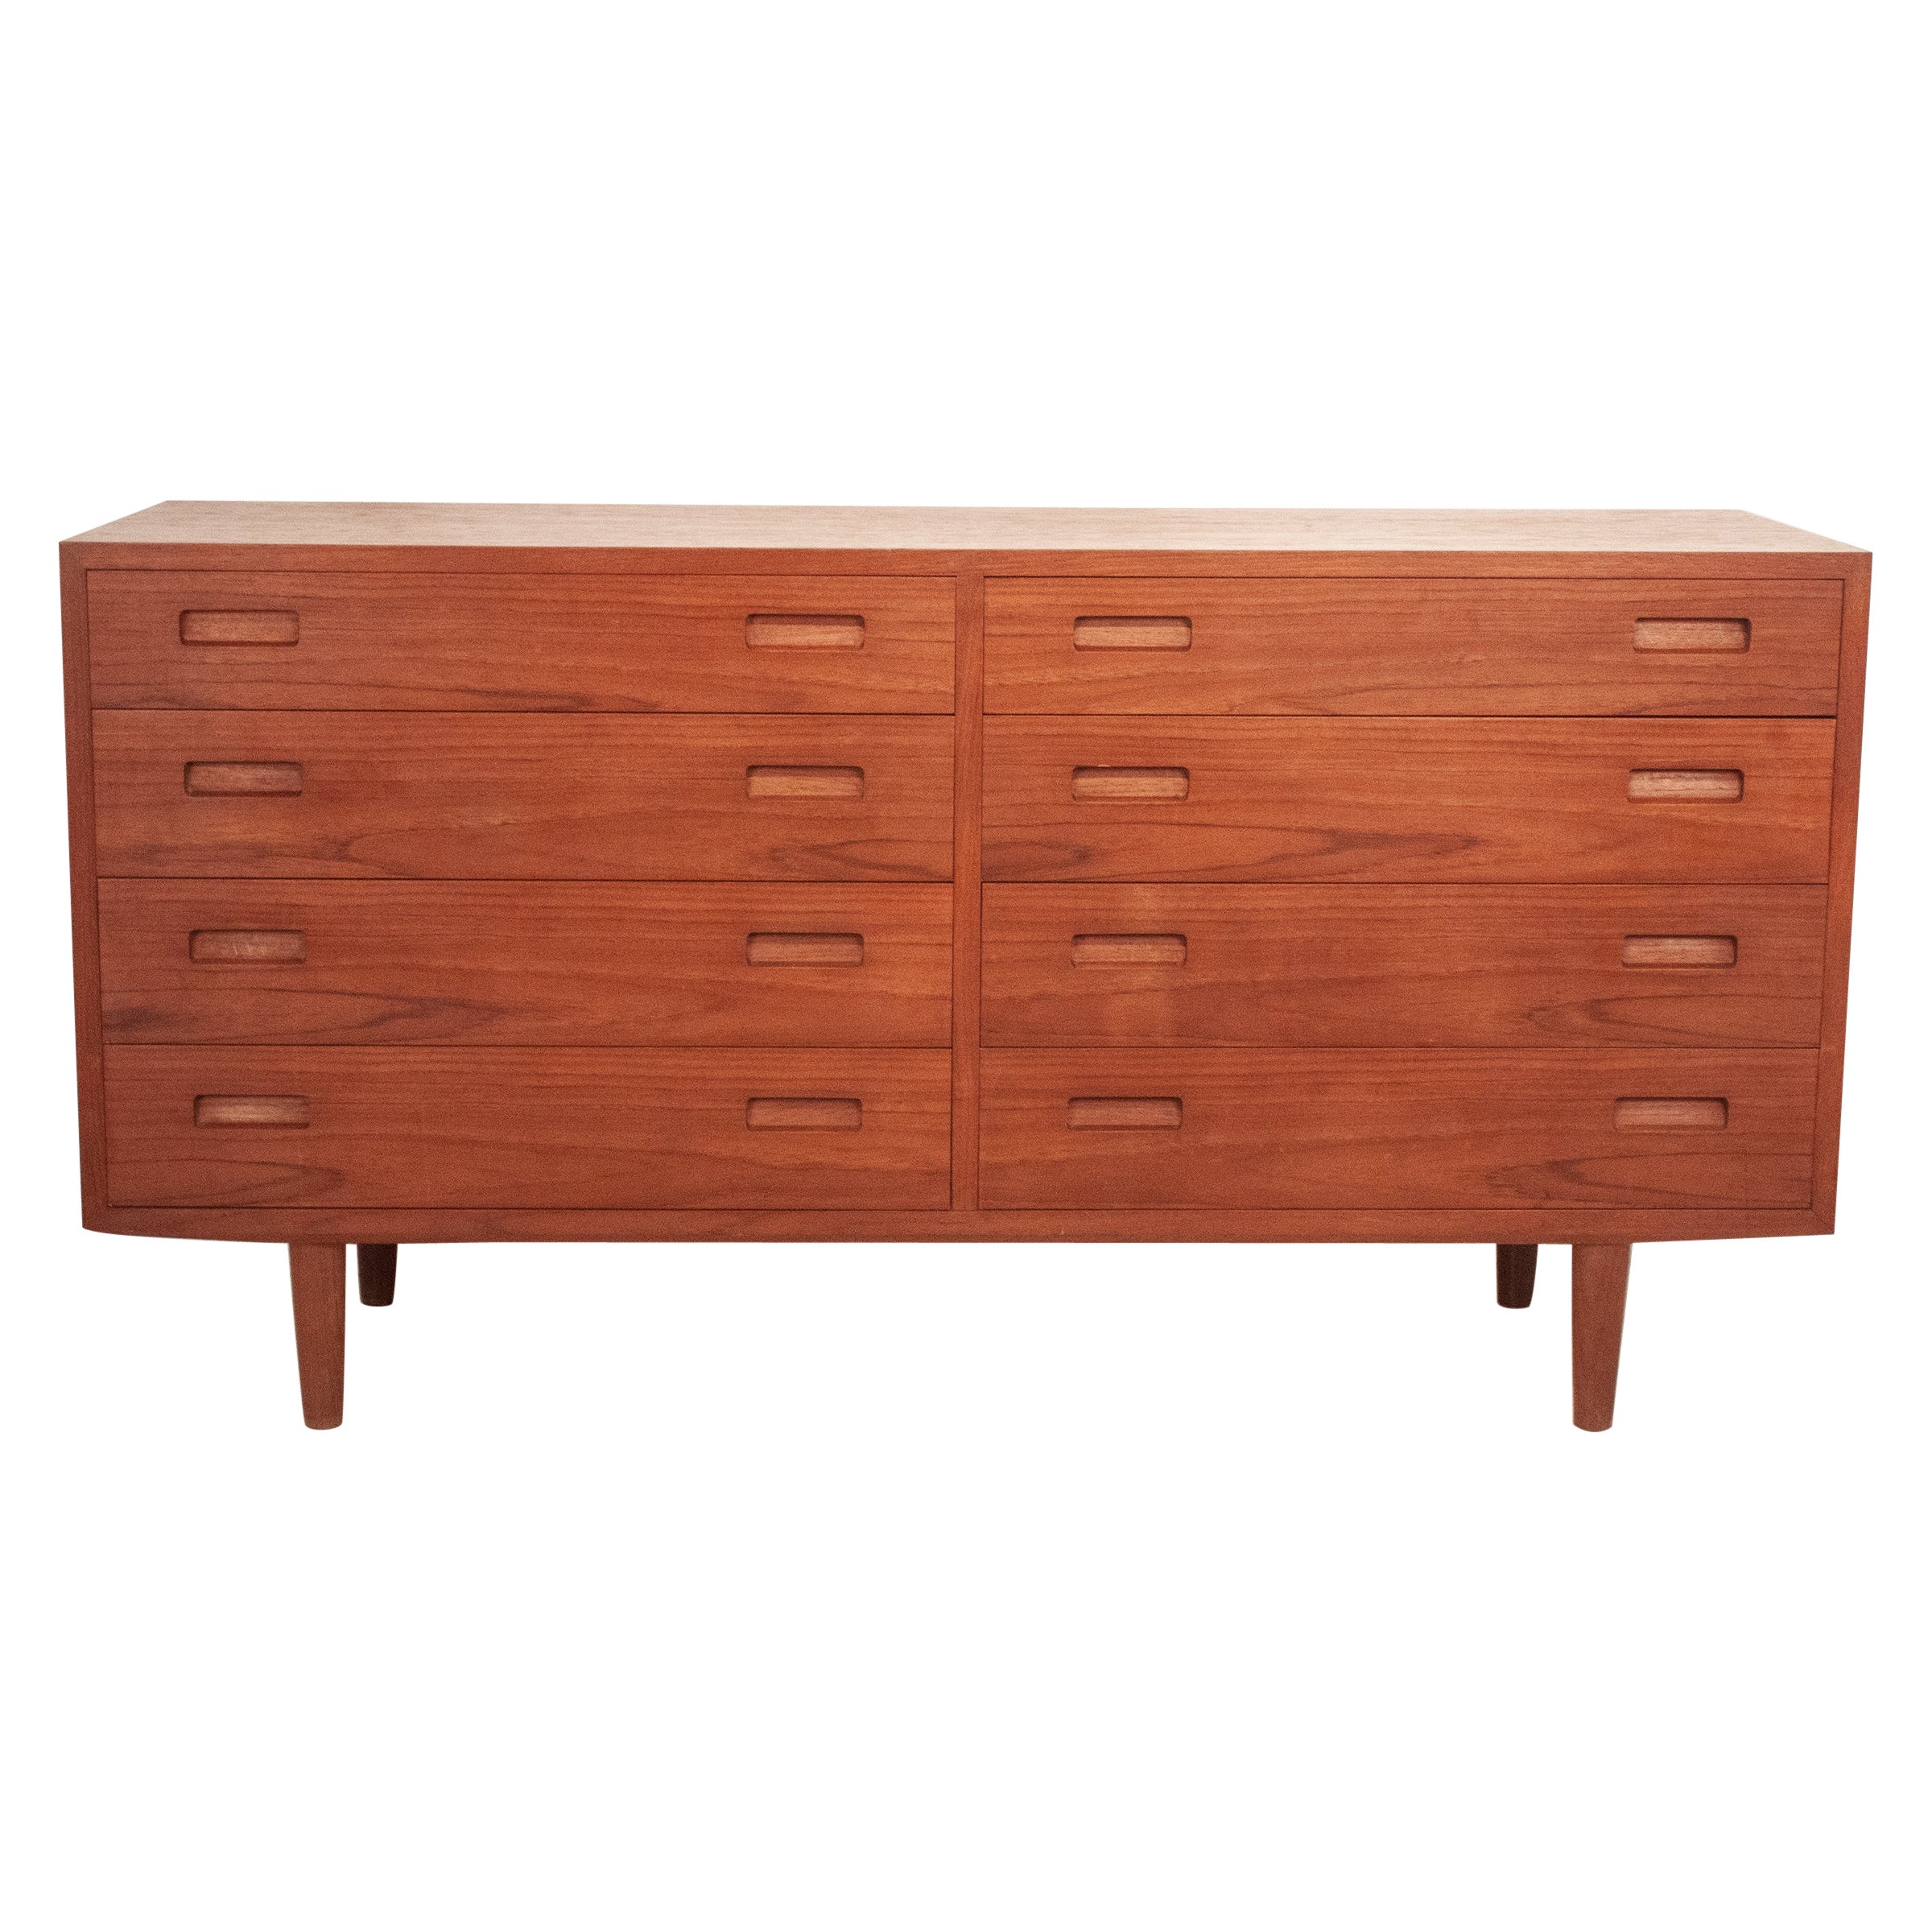 Danish Chest of Drawers Teak Wood by Carlo Jensen for Hundevad, 1950s